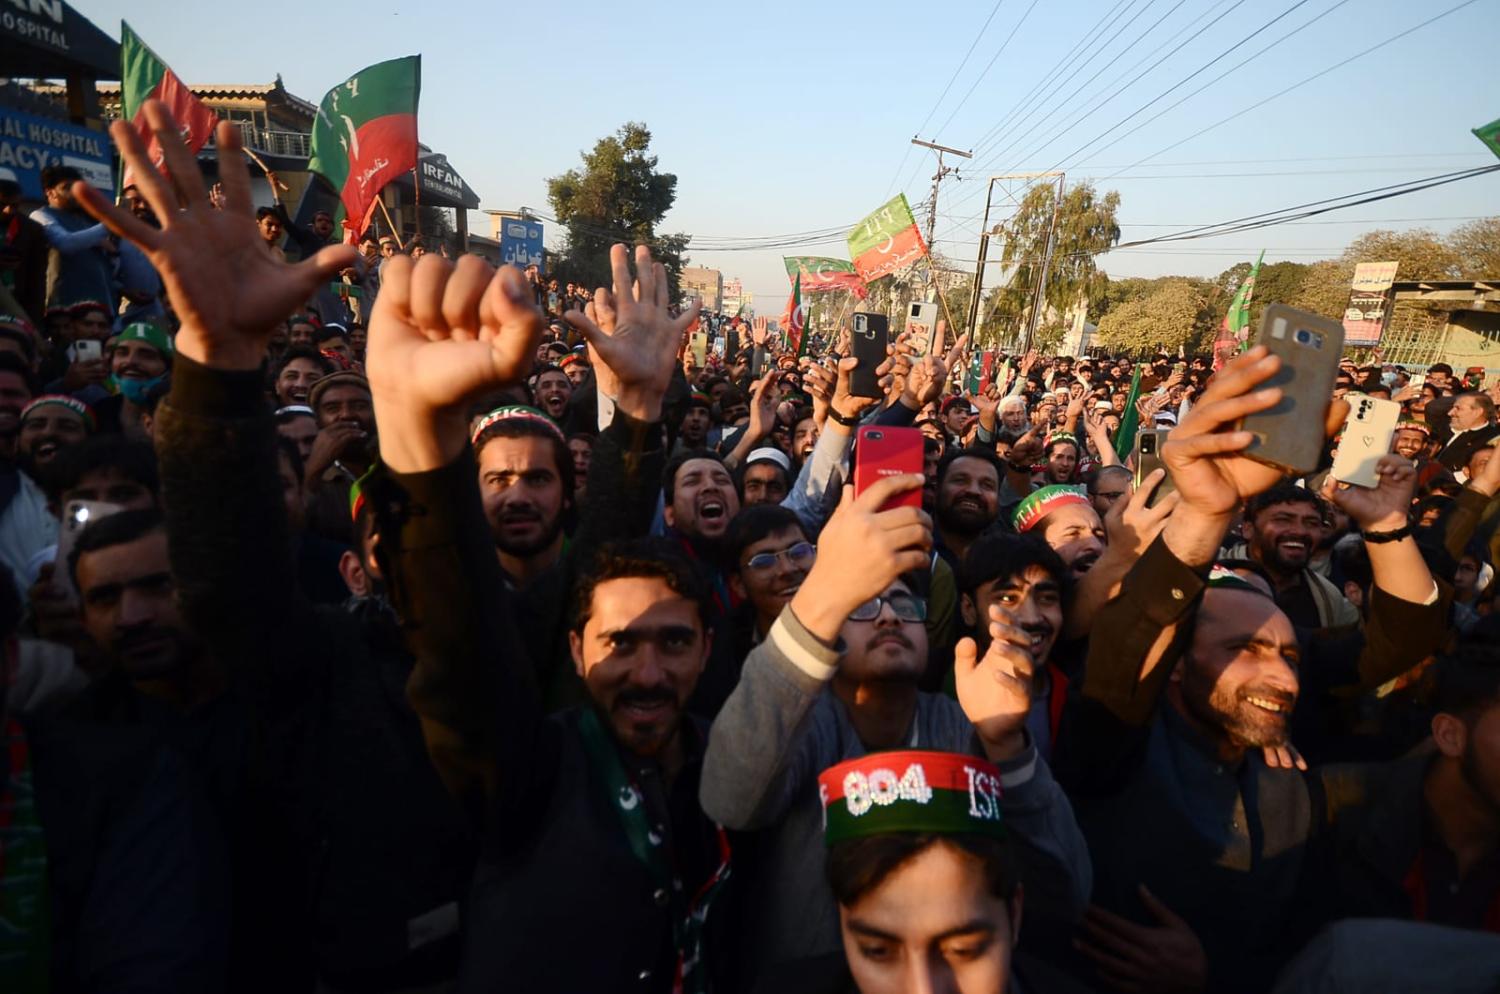 Supporters of the convicted former Pakistani Prime Minister Khan's Pakistan Tehrik-e-Insaf (PTI) political party hold their phones aloft at a rally in Peshawar on 10 February (Hussain Ali/Anadolu via Getty Images)